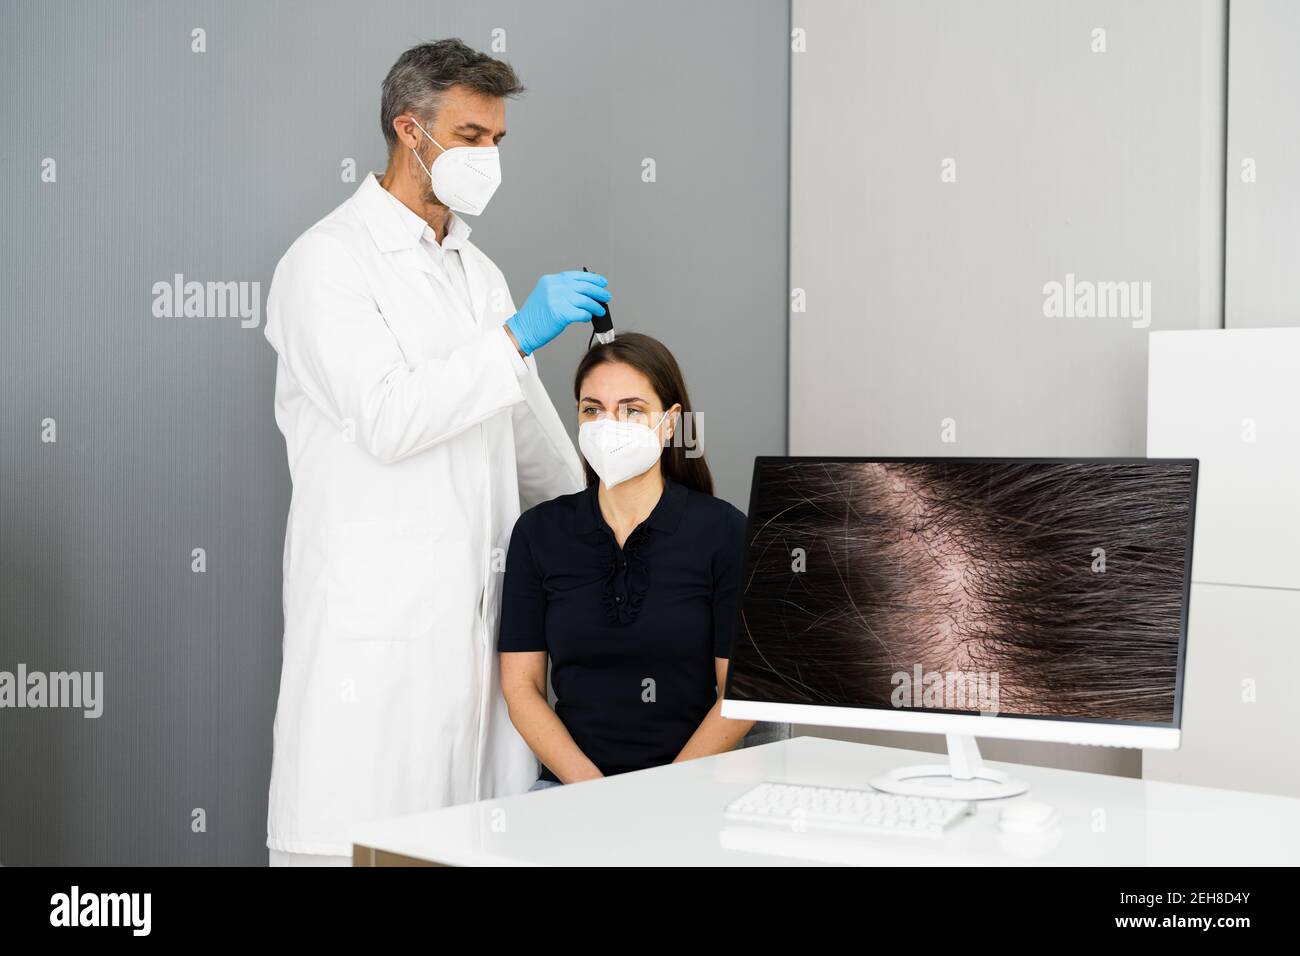 Hair Loss Dandruff Treatment By Doctor In Face Mask Stock Photo